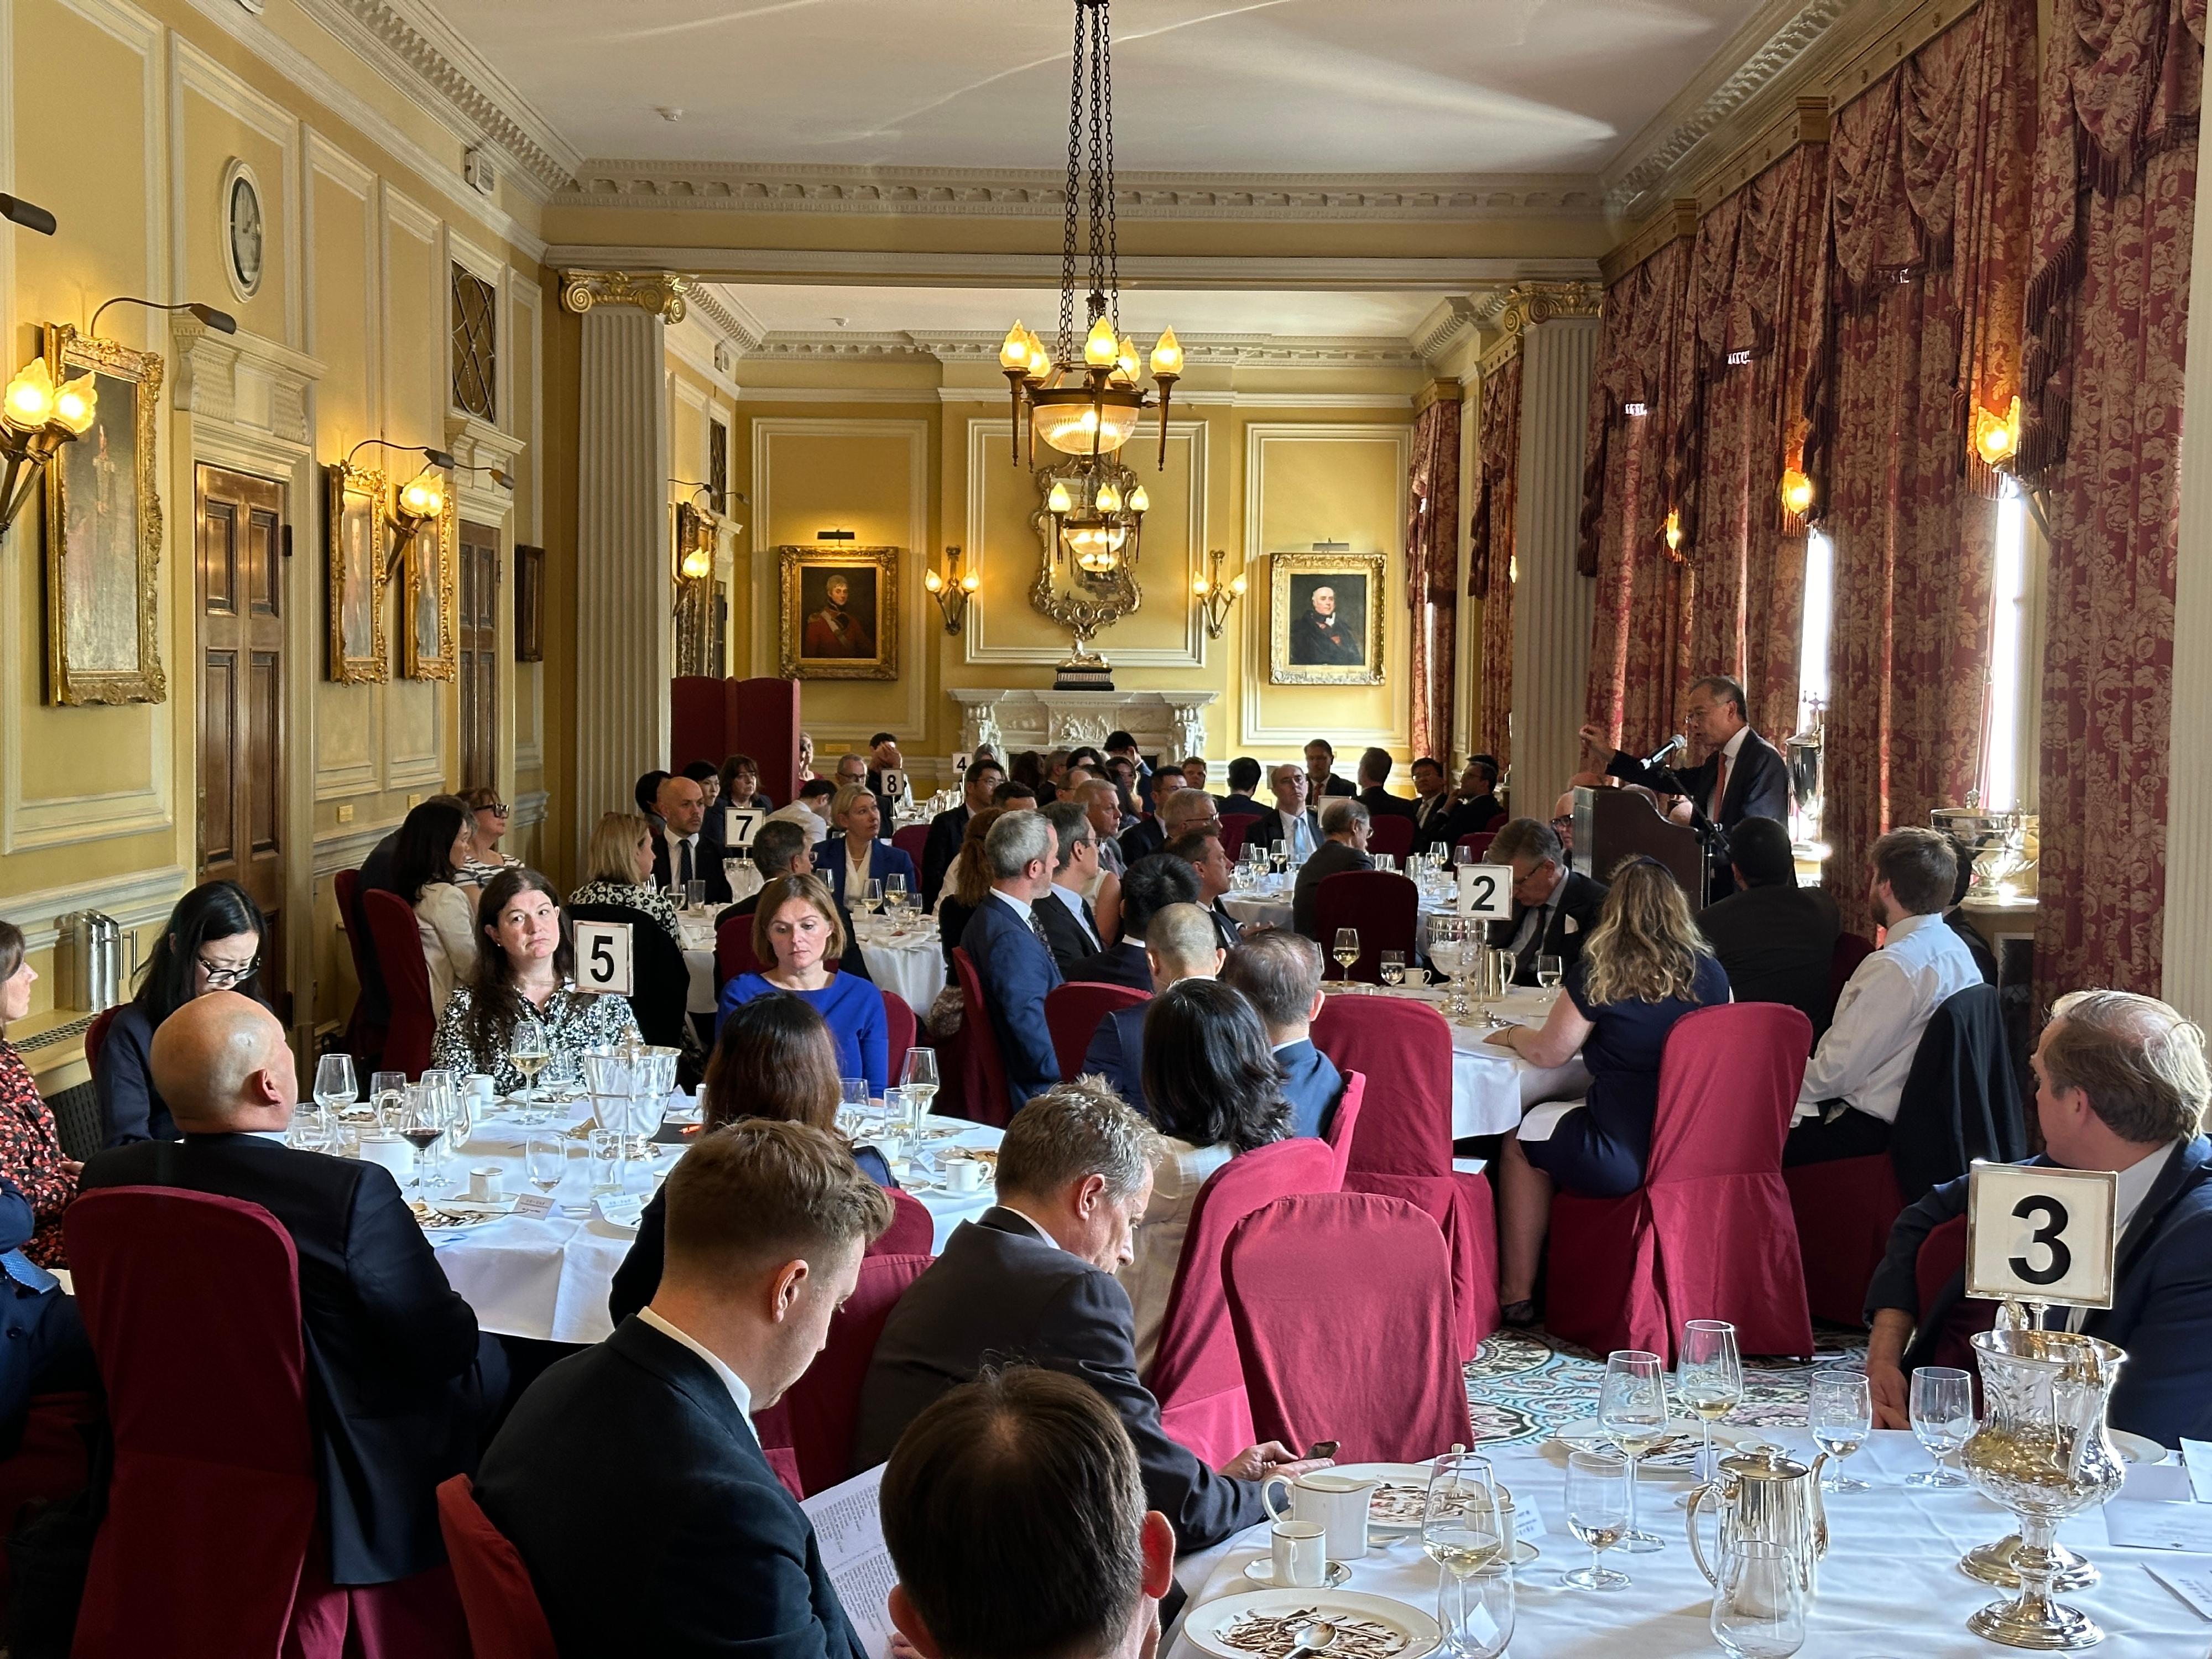 The Hong Kong Economic and Trade Office, London, supported the Hong Kong Association to hold a luncheon on May 10 (London time) to promote Hong Kong's position as a forward-looking international financial centre. The luncheon was attended by over 80 participants, including government officials, parliamentarians, and senior representatives from the financial, business and legal circles.